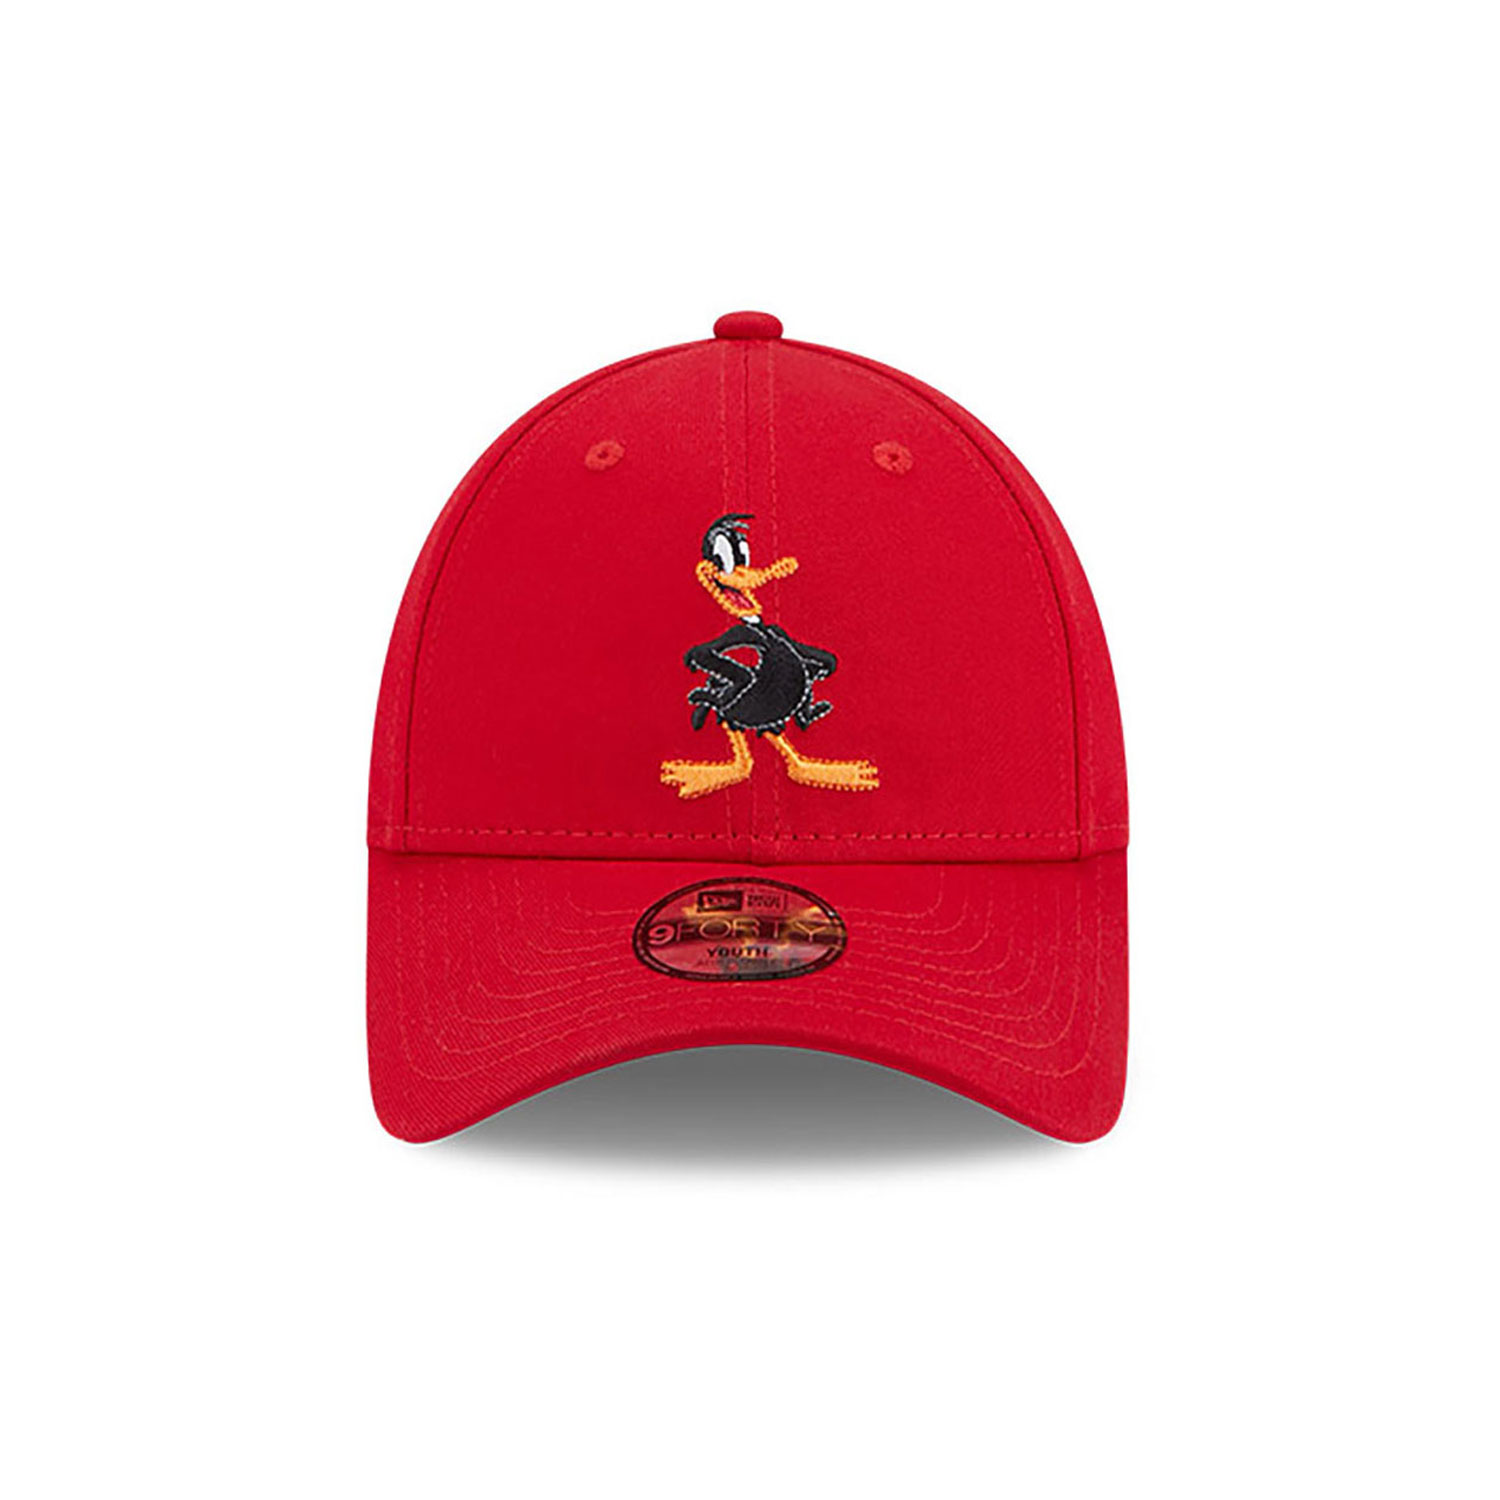 Warner Brothers Daffy Duck Red Youth 9FORTY Adjustable Cap